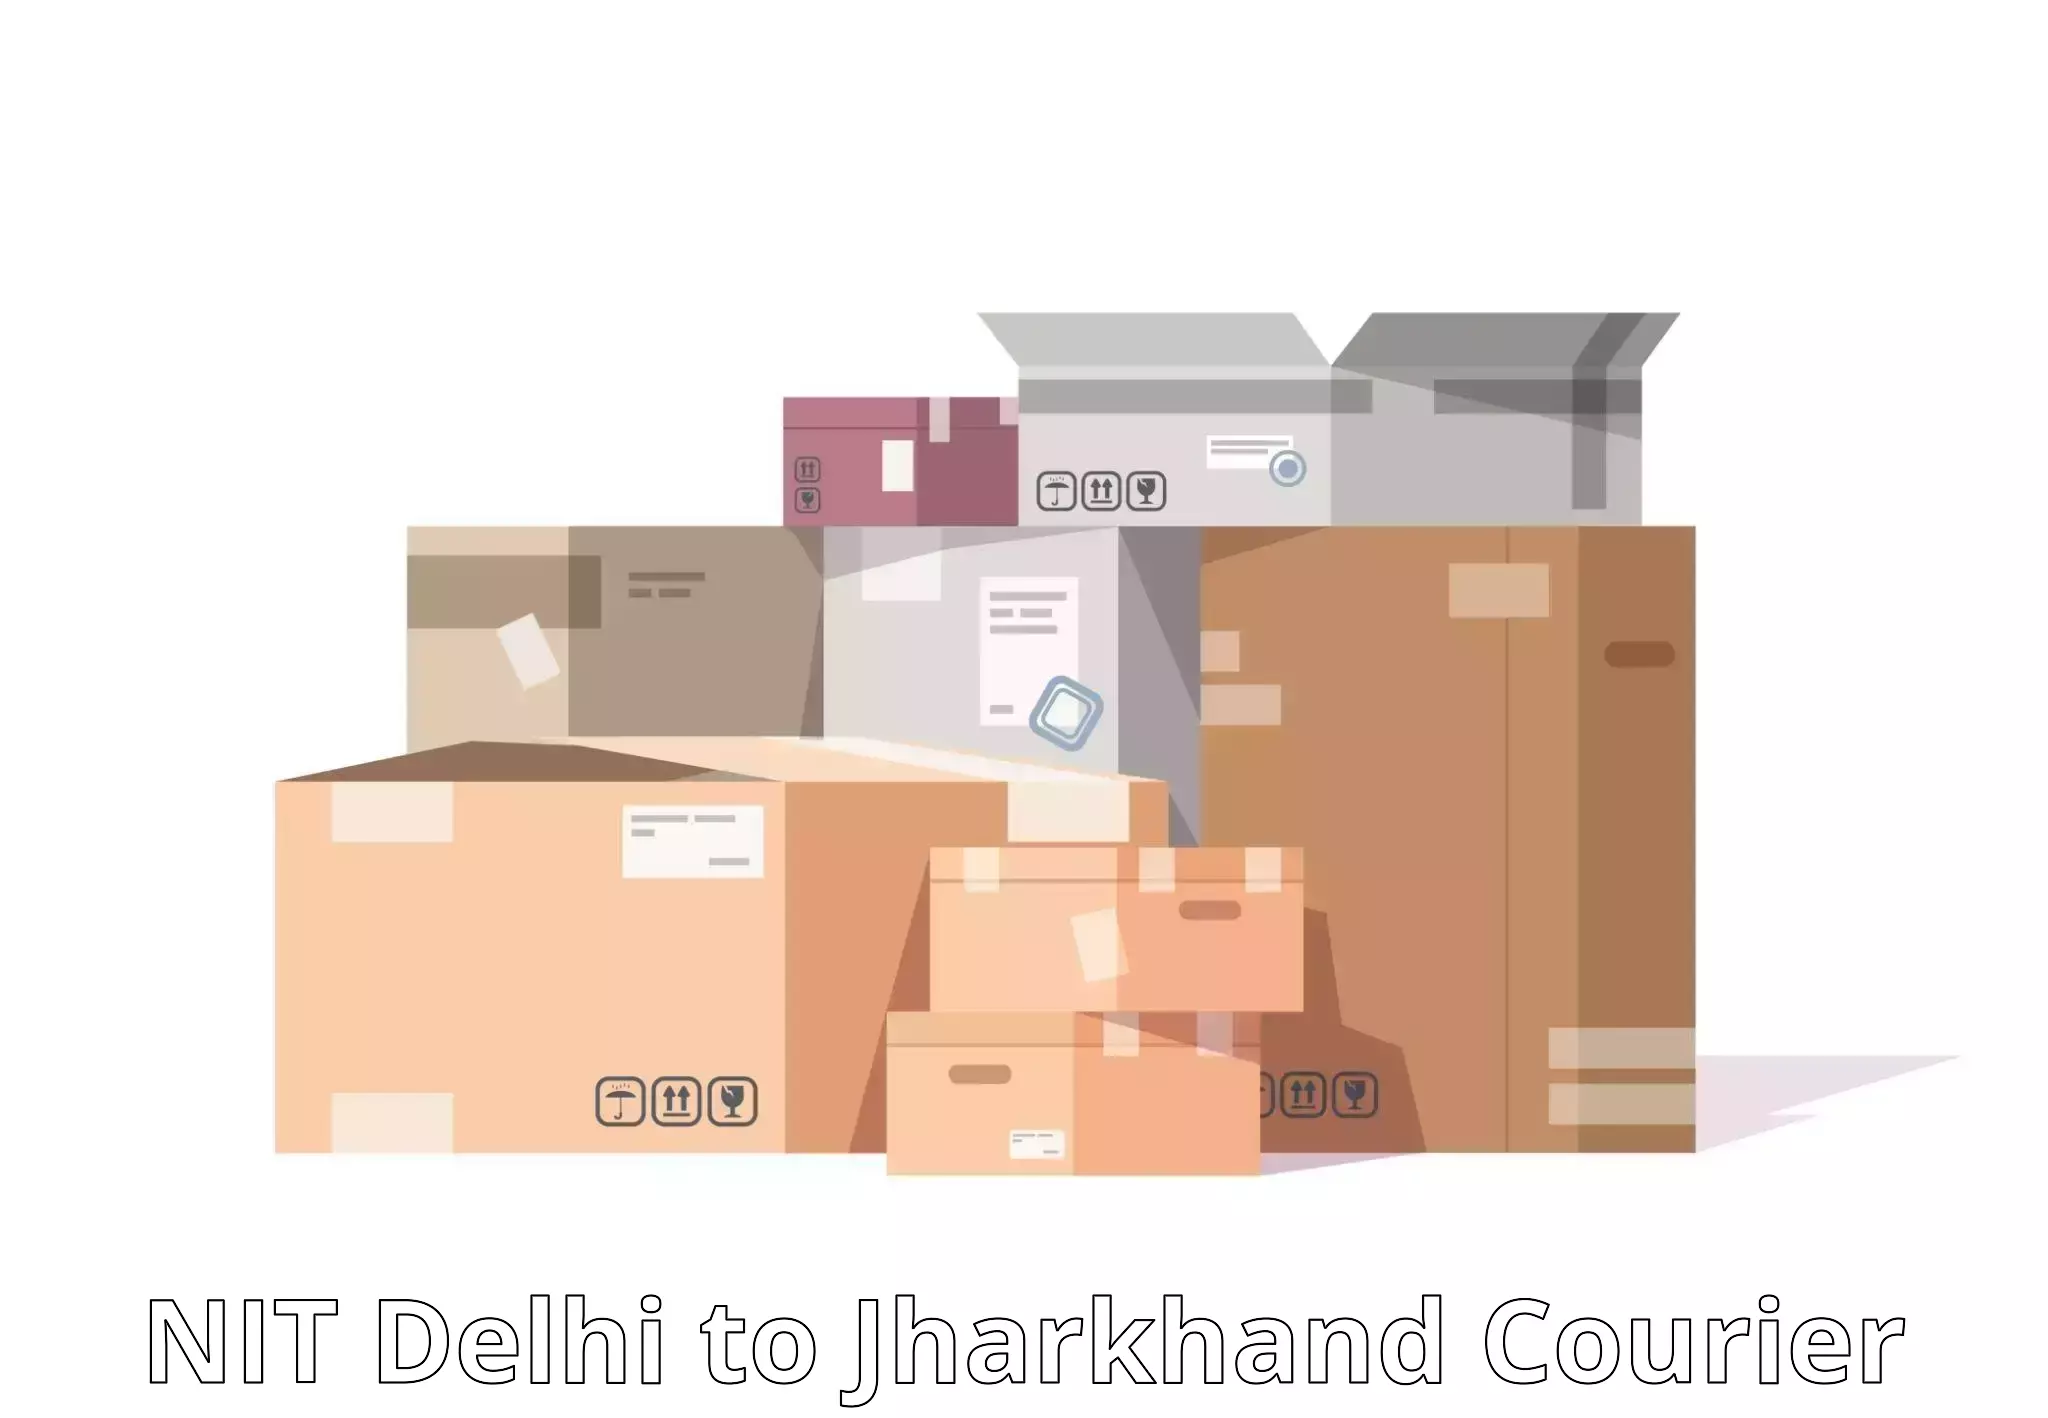 24/7 shipping services NIT Delhi to IIT Dhanbad